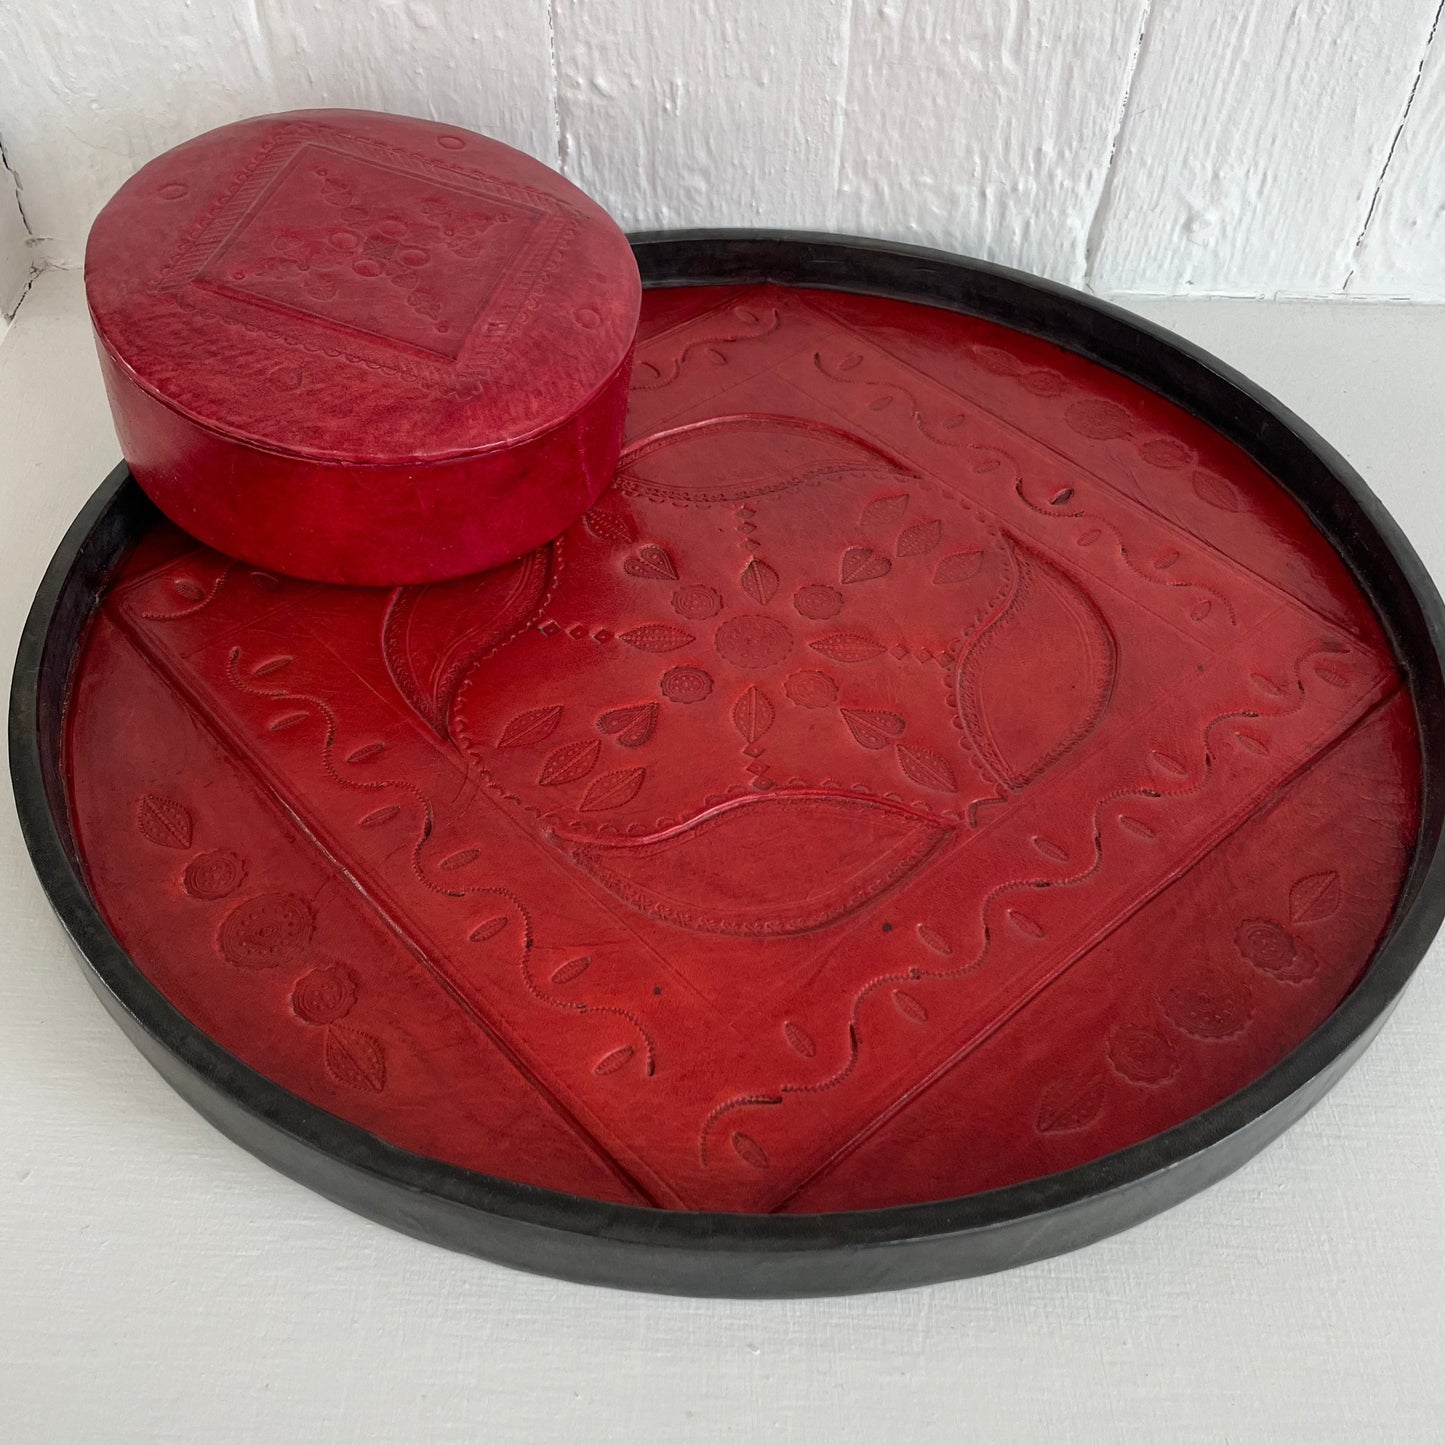 Serving tray in leather, red and black, 40 cm in diameter. Handmade and Fair Trade from Senegal